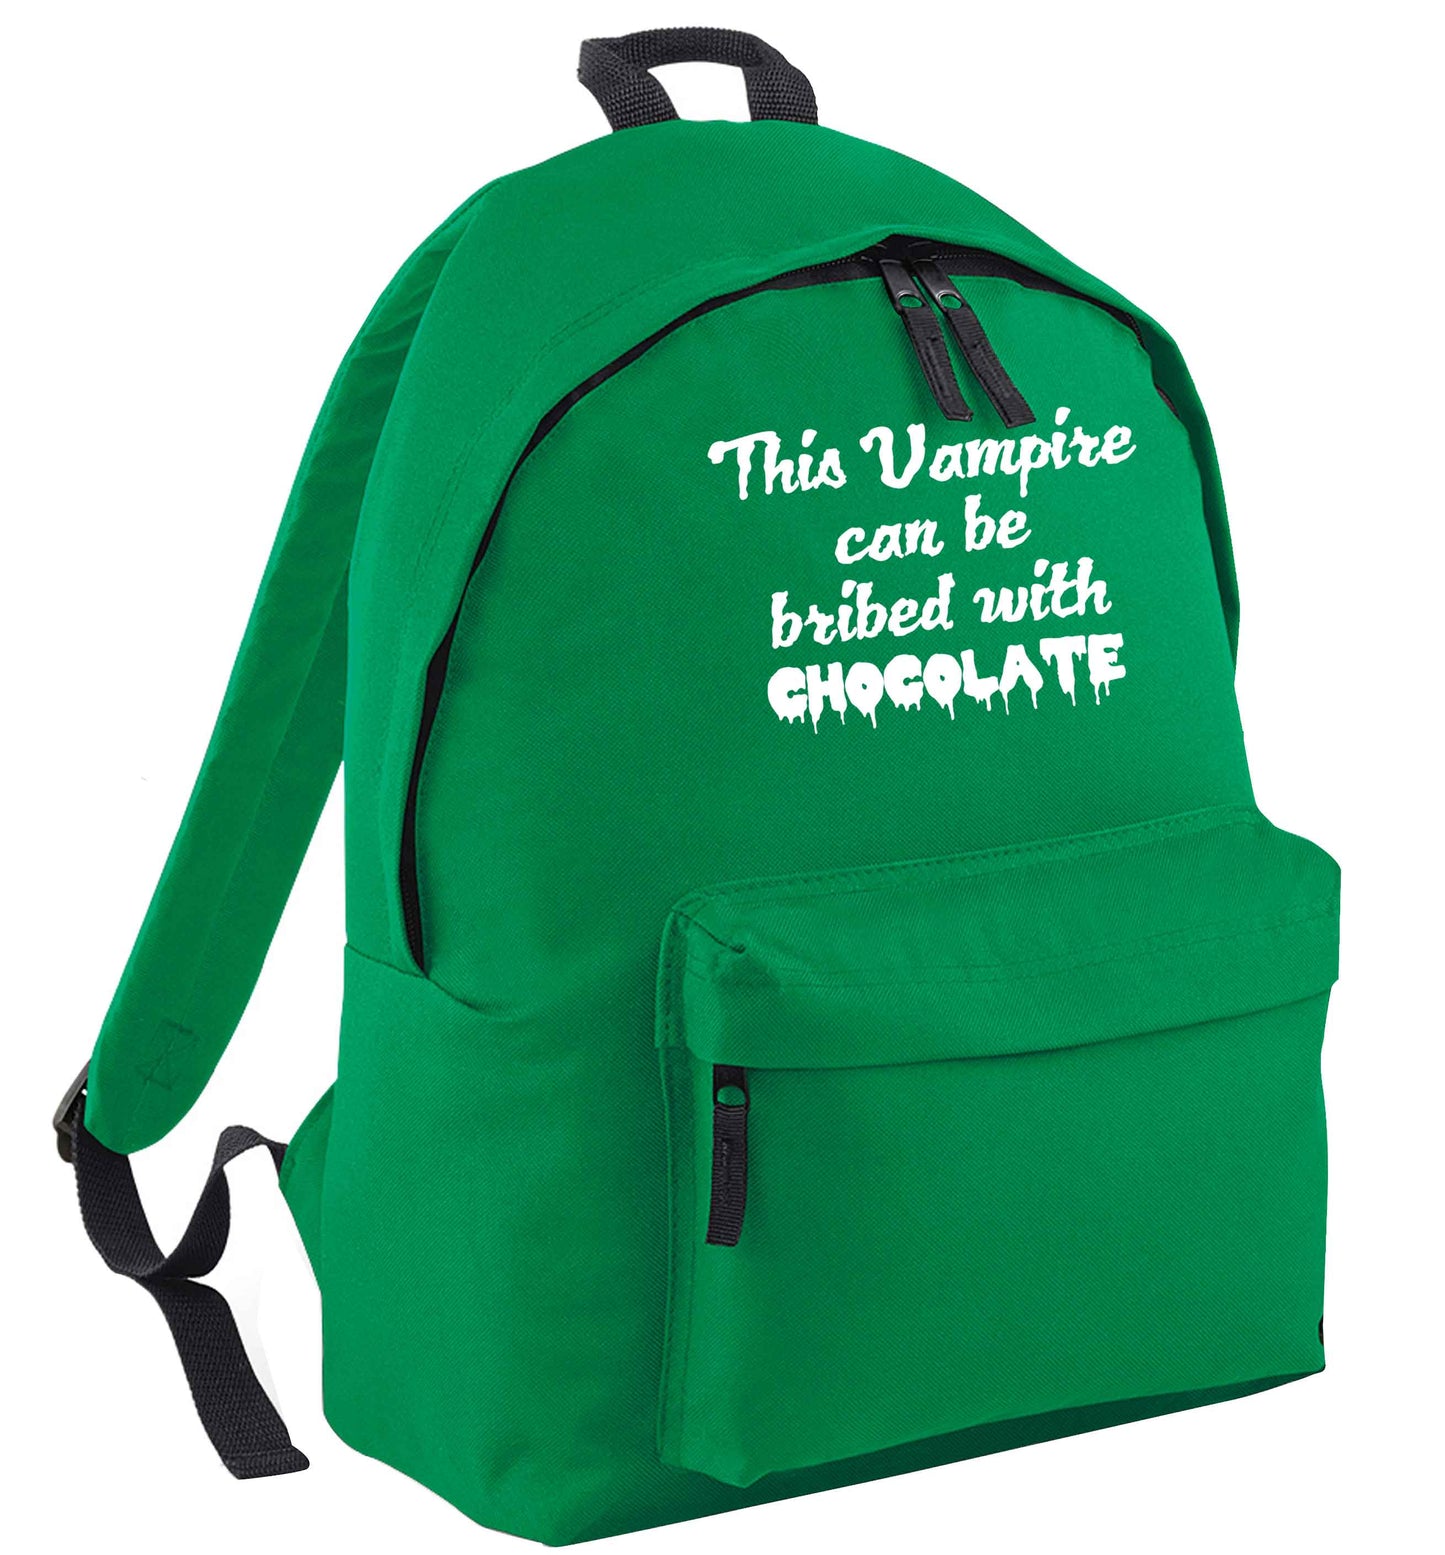 This vampire can be bribed with chocolate green adults backpack